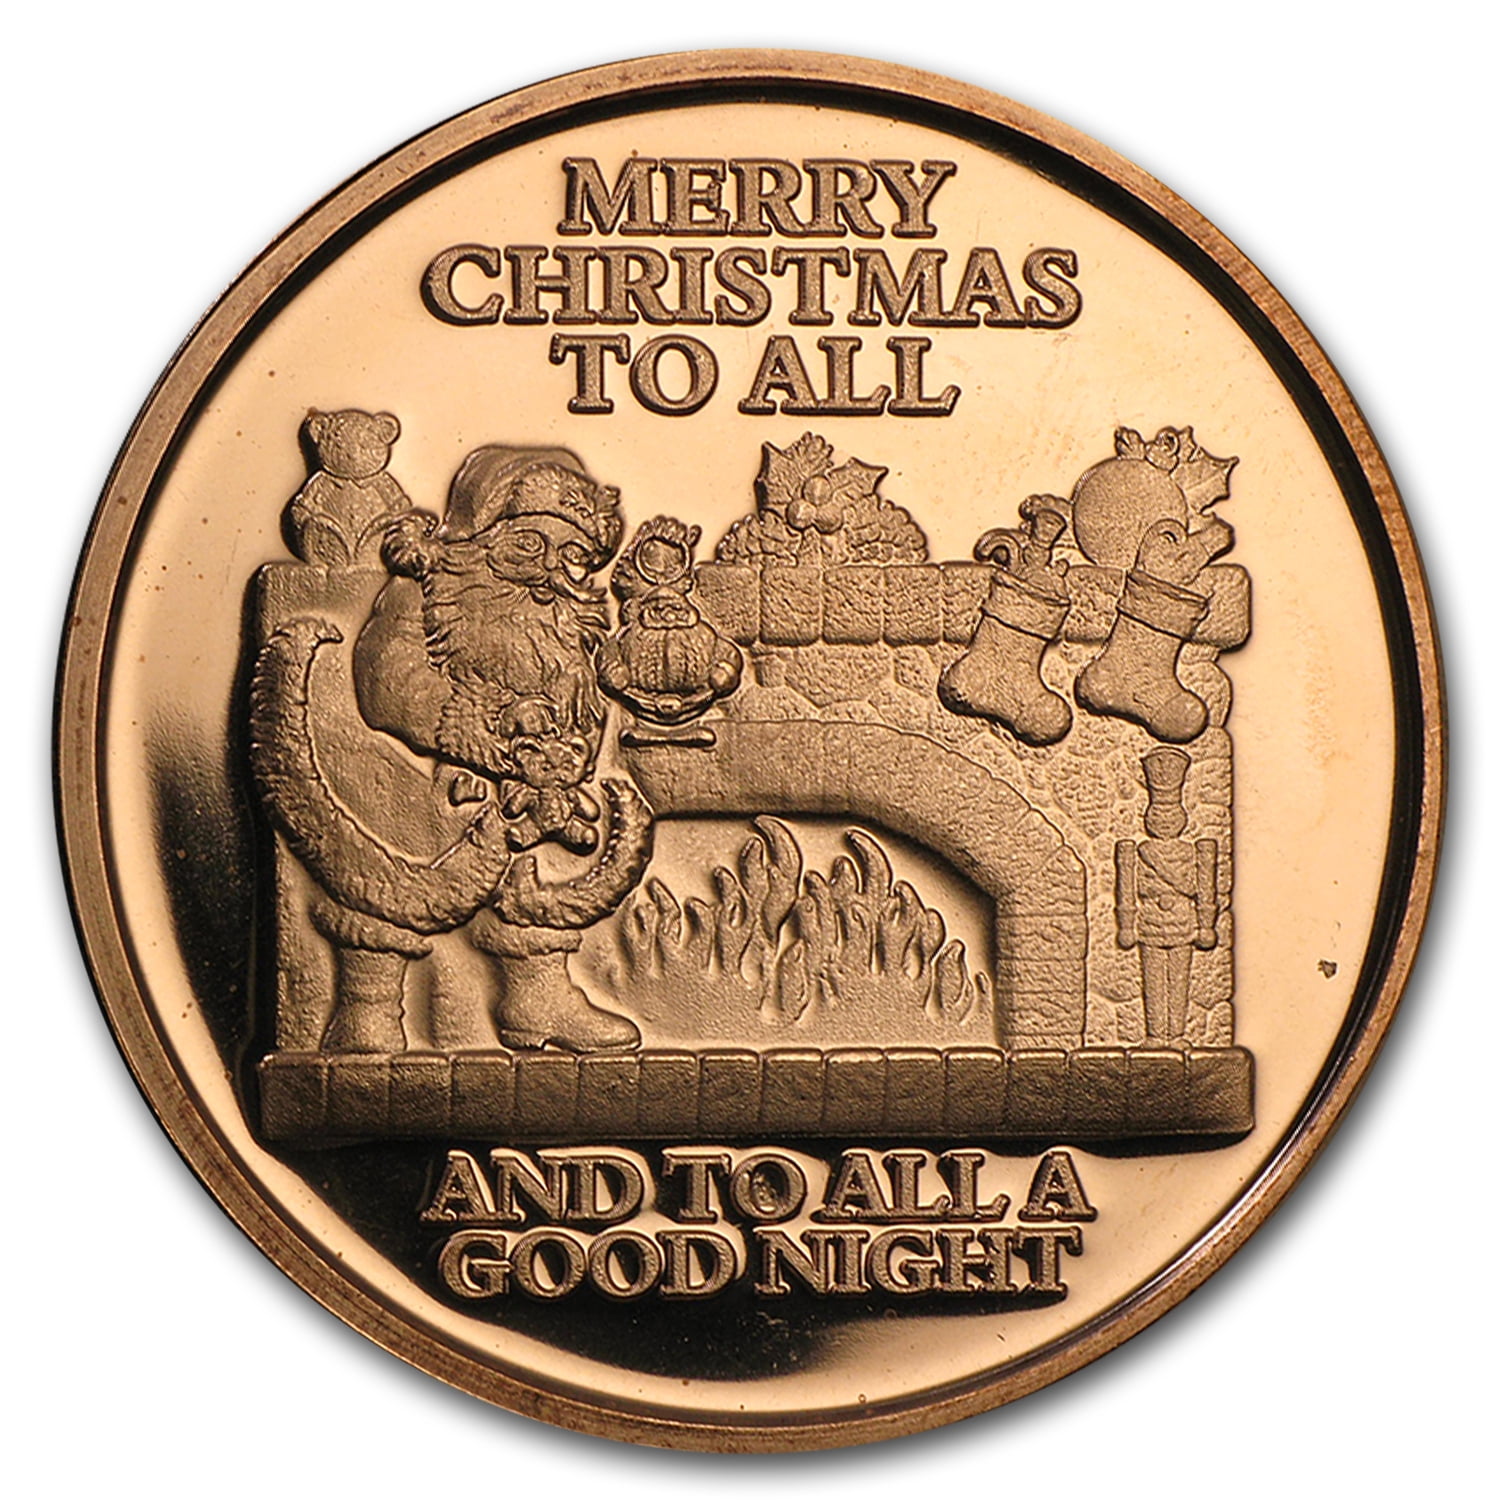 Details about   Merry Christmas Graffiti 1 oz .999 Copper BU Round USA Made Holiday Season Coin 